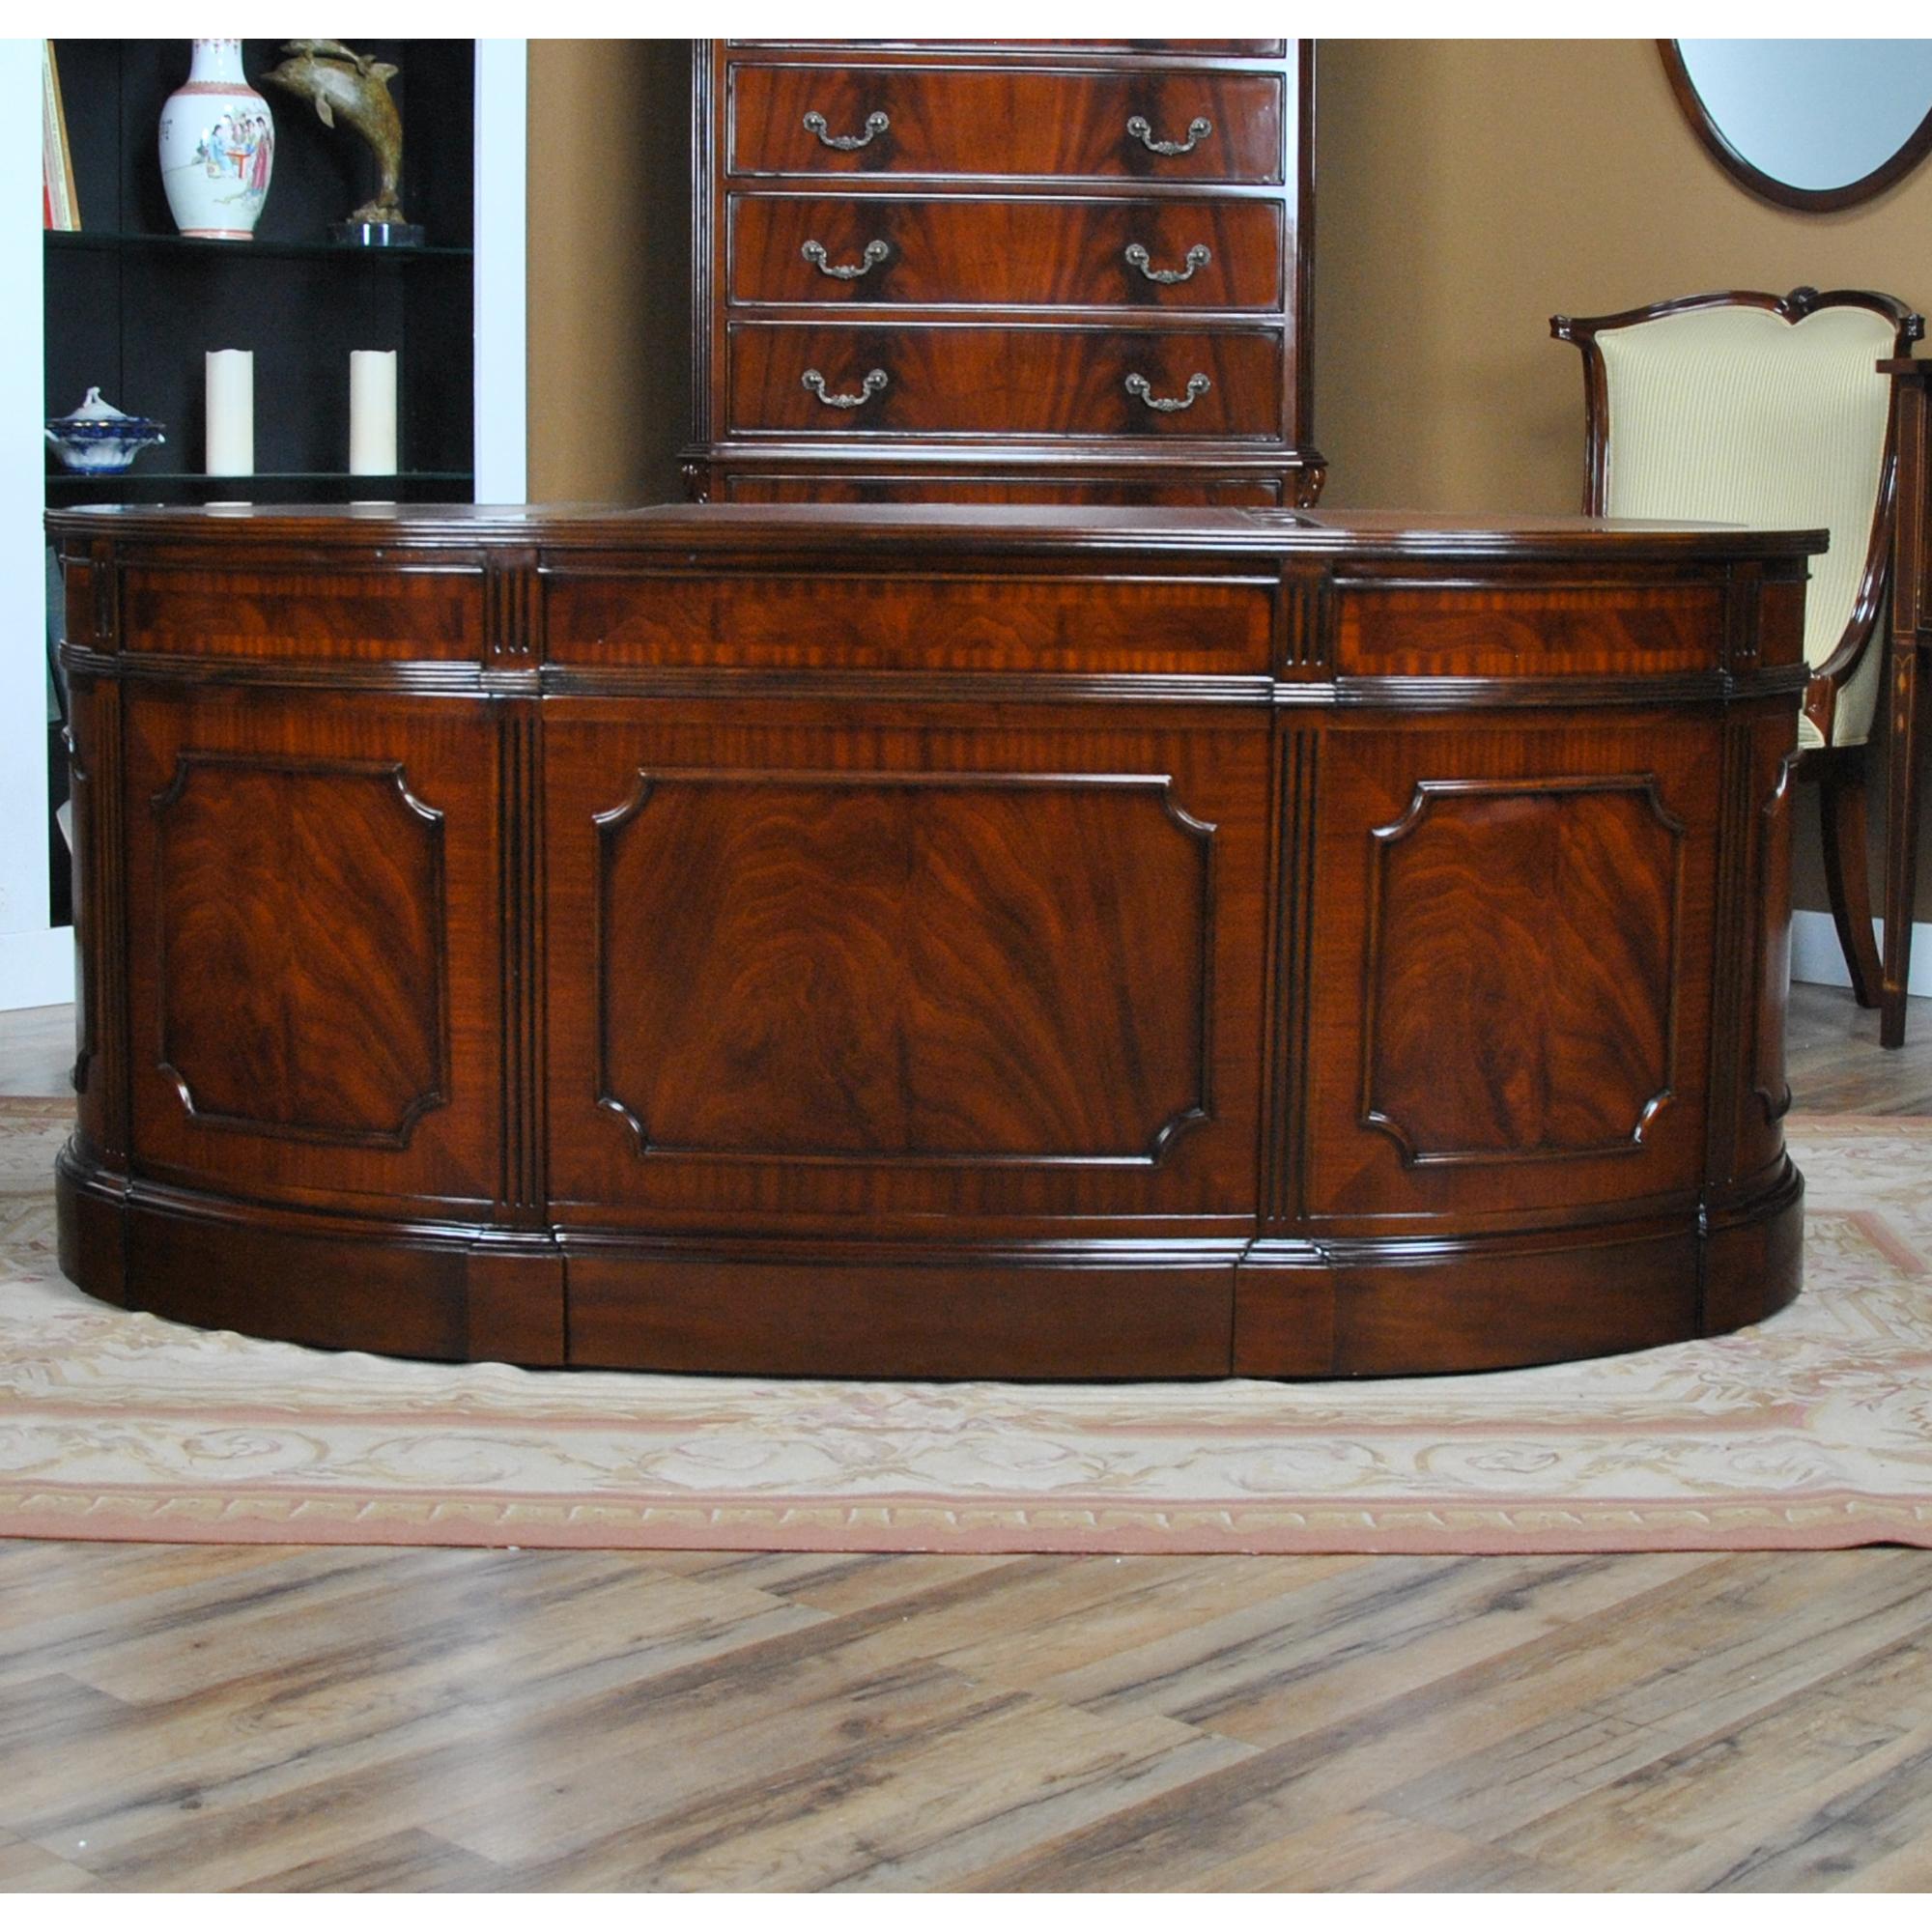 One of the most beautiful items that we produce at Niagara furniture our Oval Leather Top Desk with Privacy Panel will certainly also be one of the most popular. The top section of the desk consists of a three-paneled writing surfaces of brown full